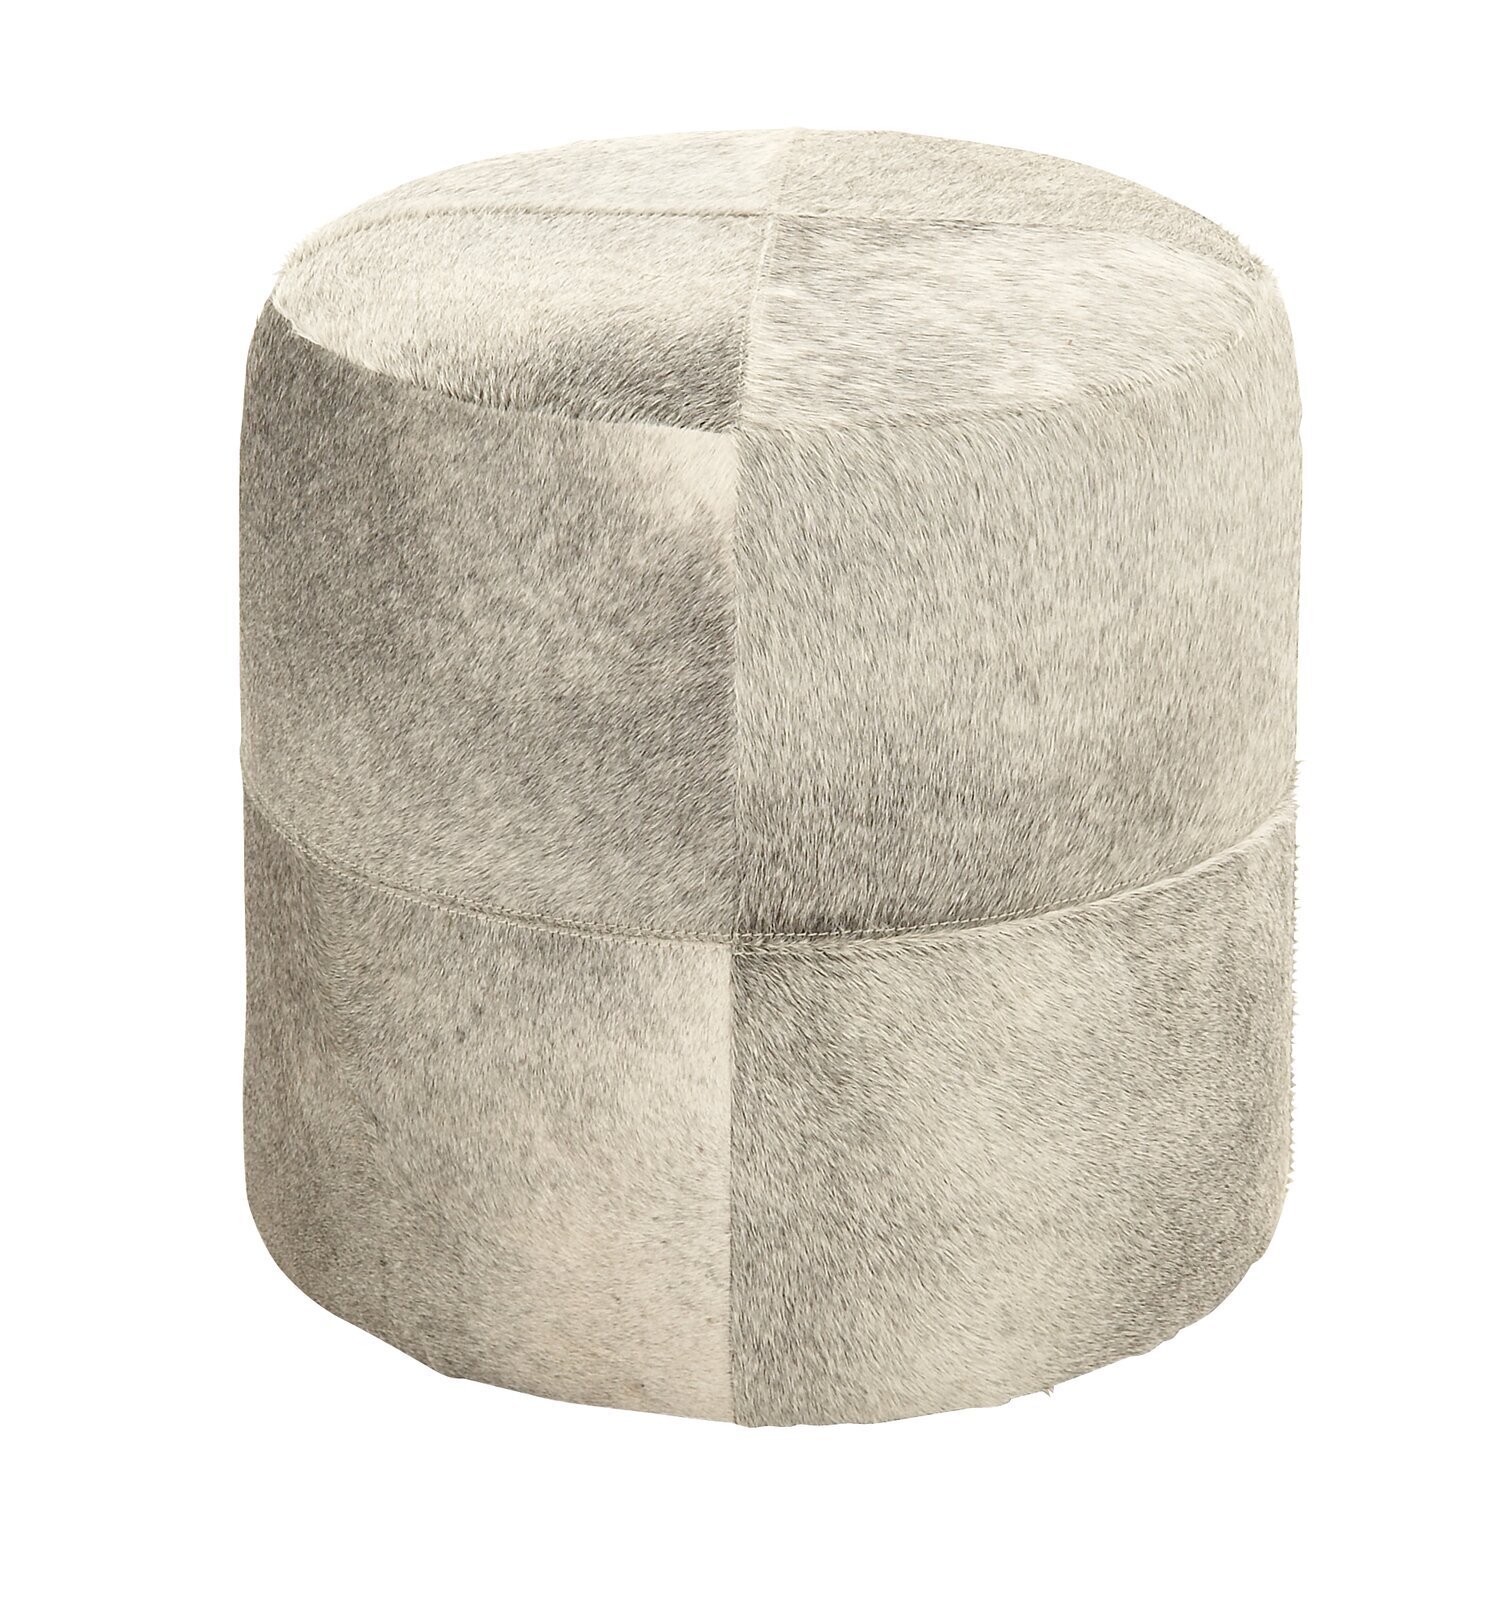 Round and Patterned Ottoman